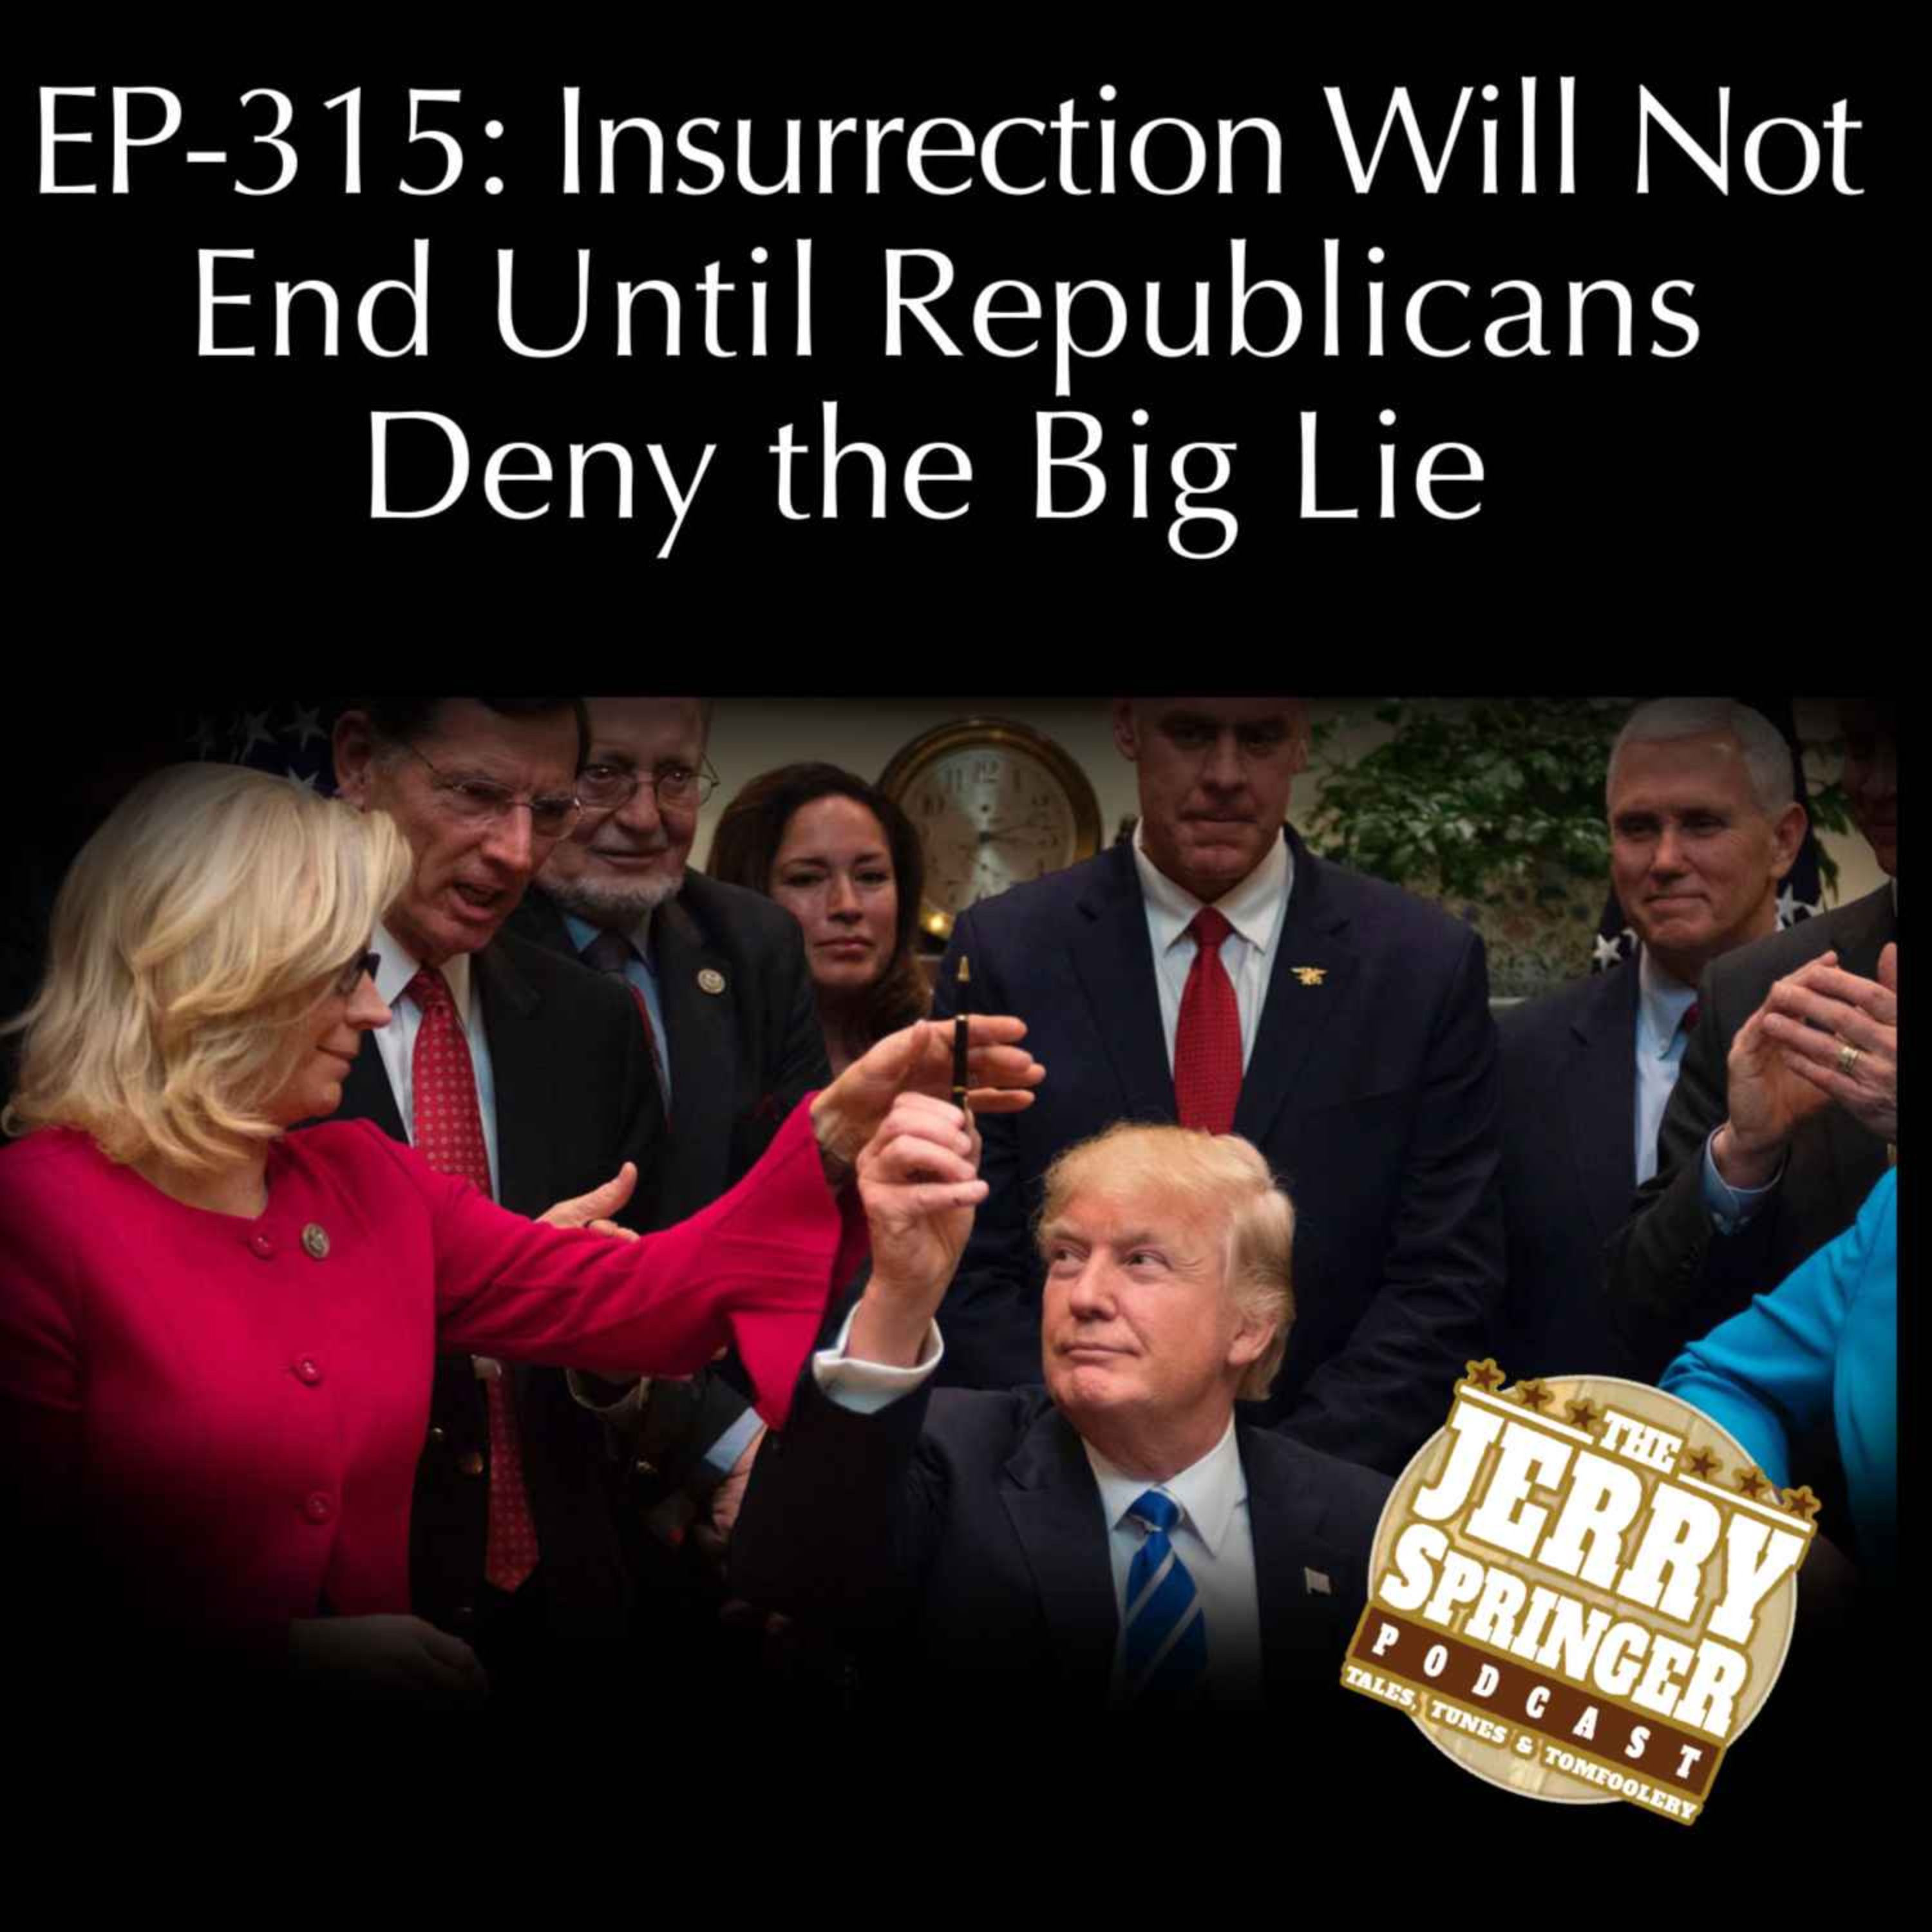 Insurrection Will Not End Until Republicans Deny the Big Lie: EP-315